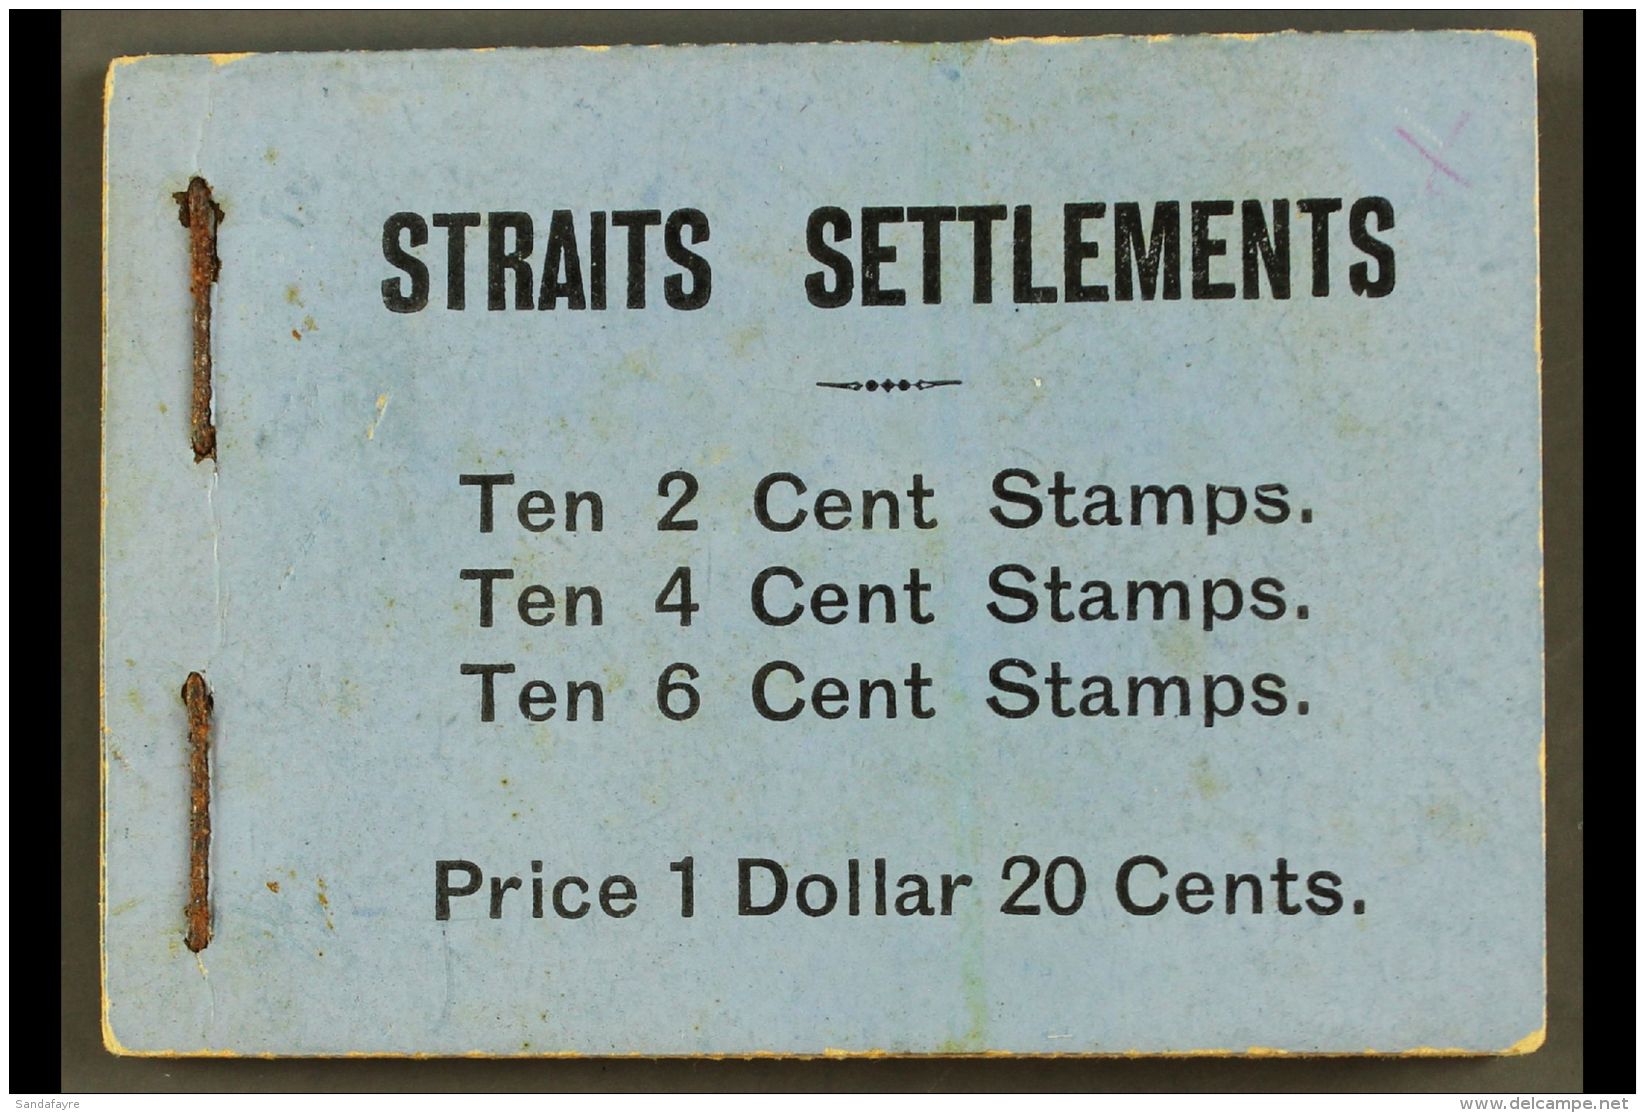 BOOKLET 1927 $1.20 Black On Grey Booklet Containing 2c, 4c And 6c Stamps, SG SB7, Cover With Small Pale Red Crayon... - Straits Settlements